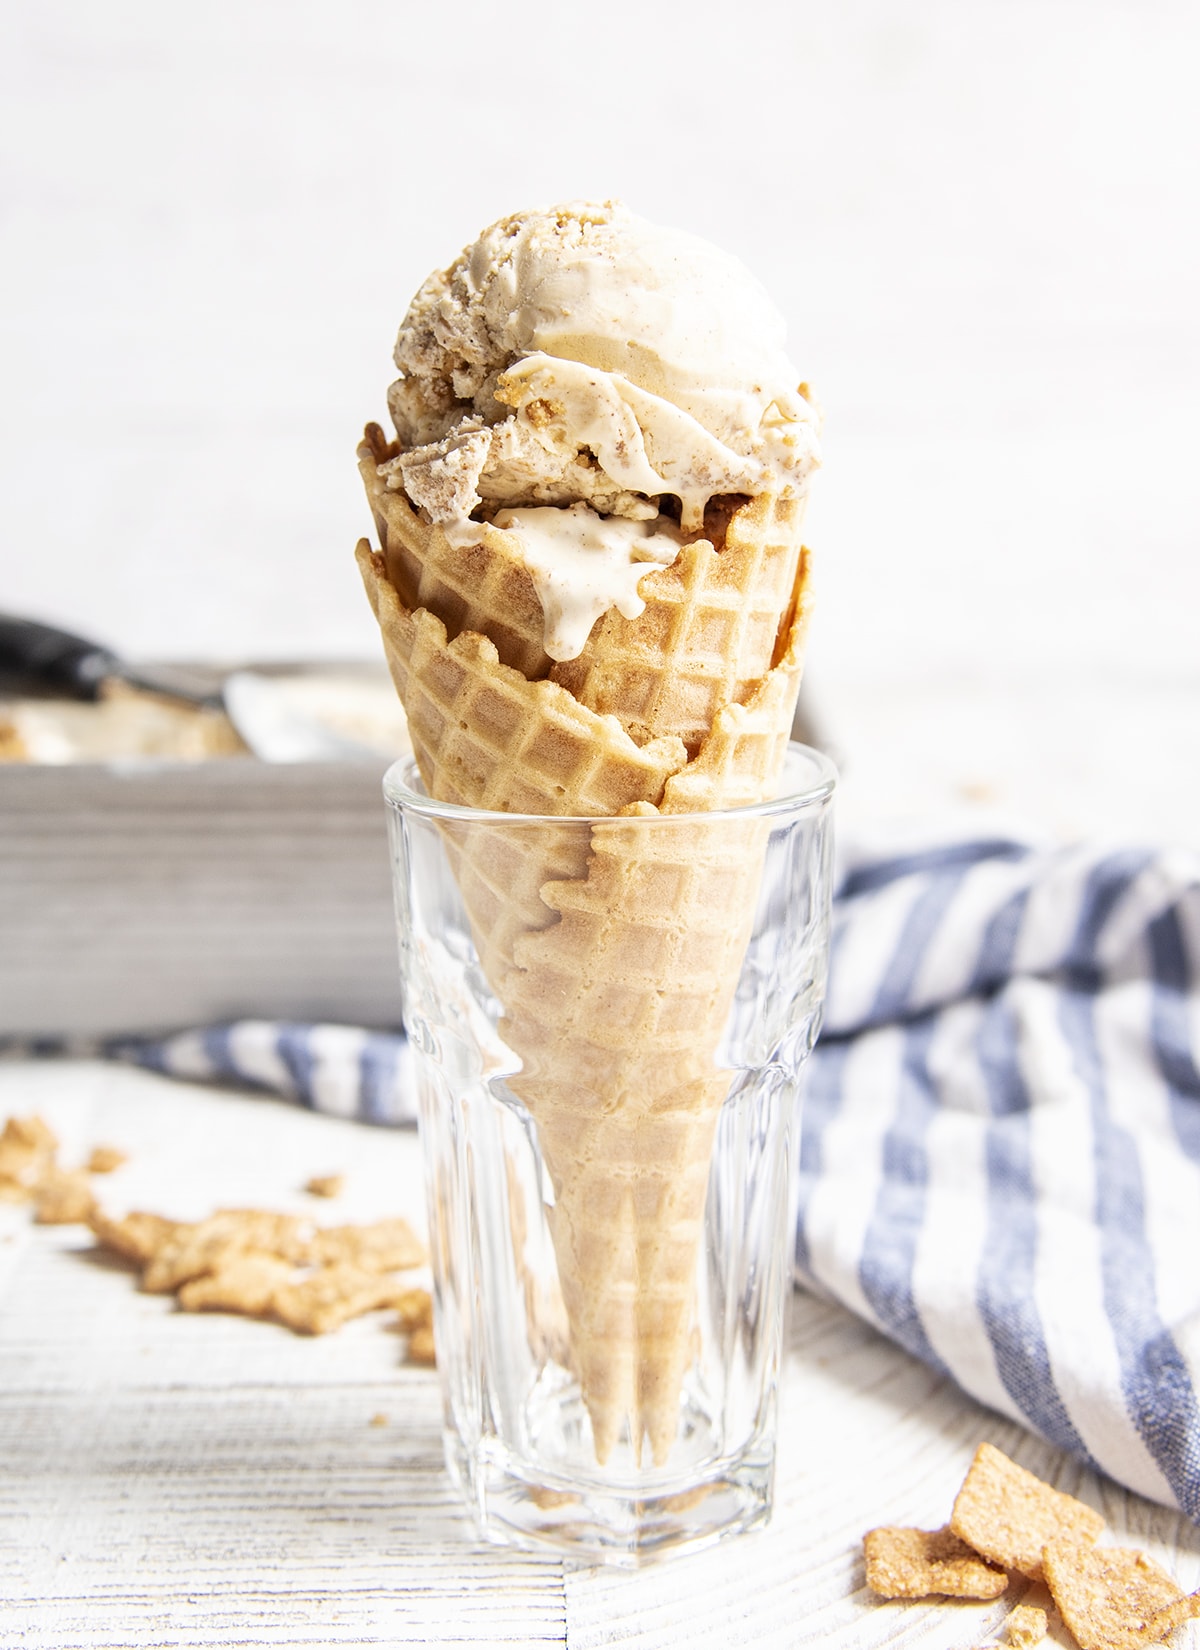 A scoop of cinnamon Toast Crunch Ice Cream in a cone, standing in a glass.